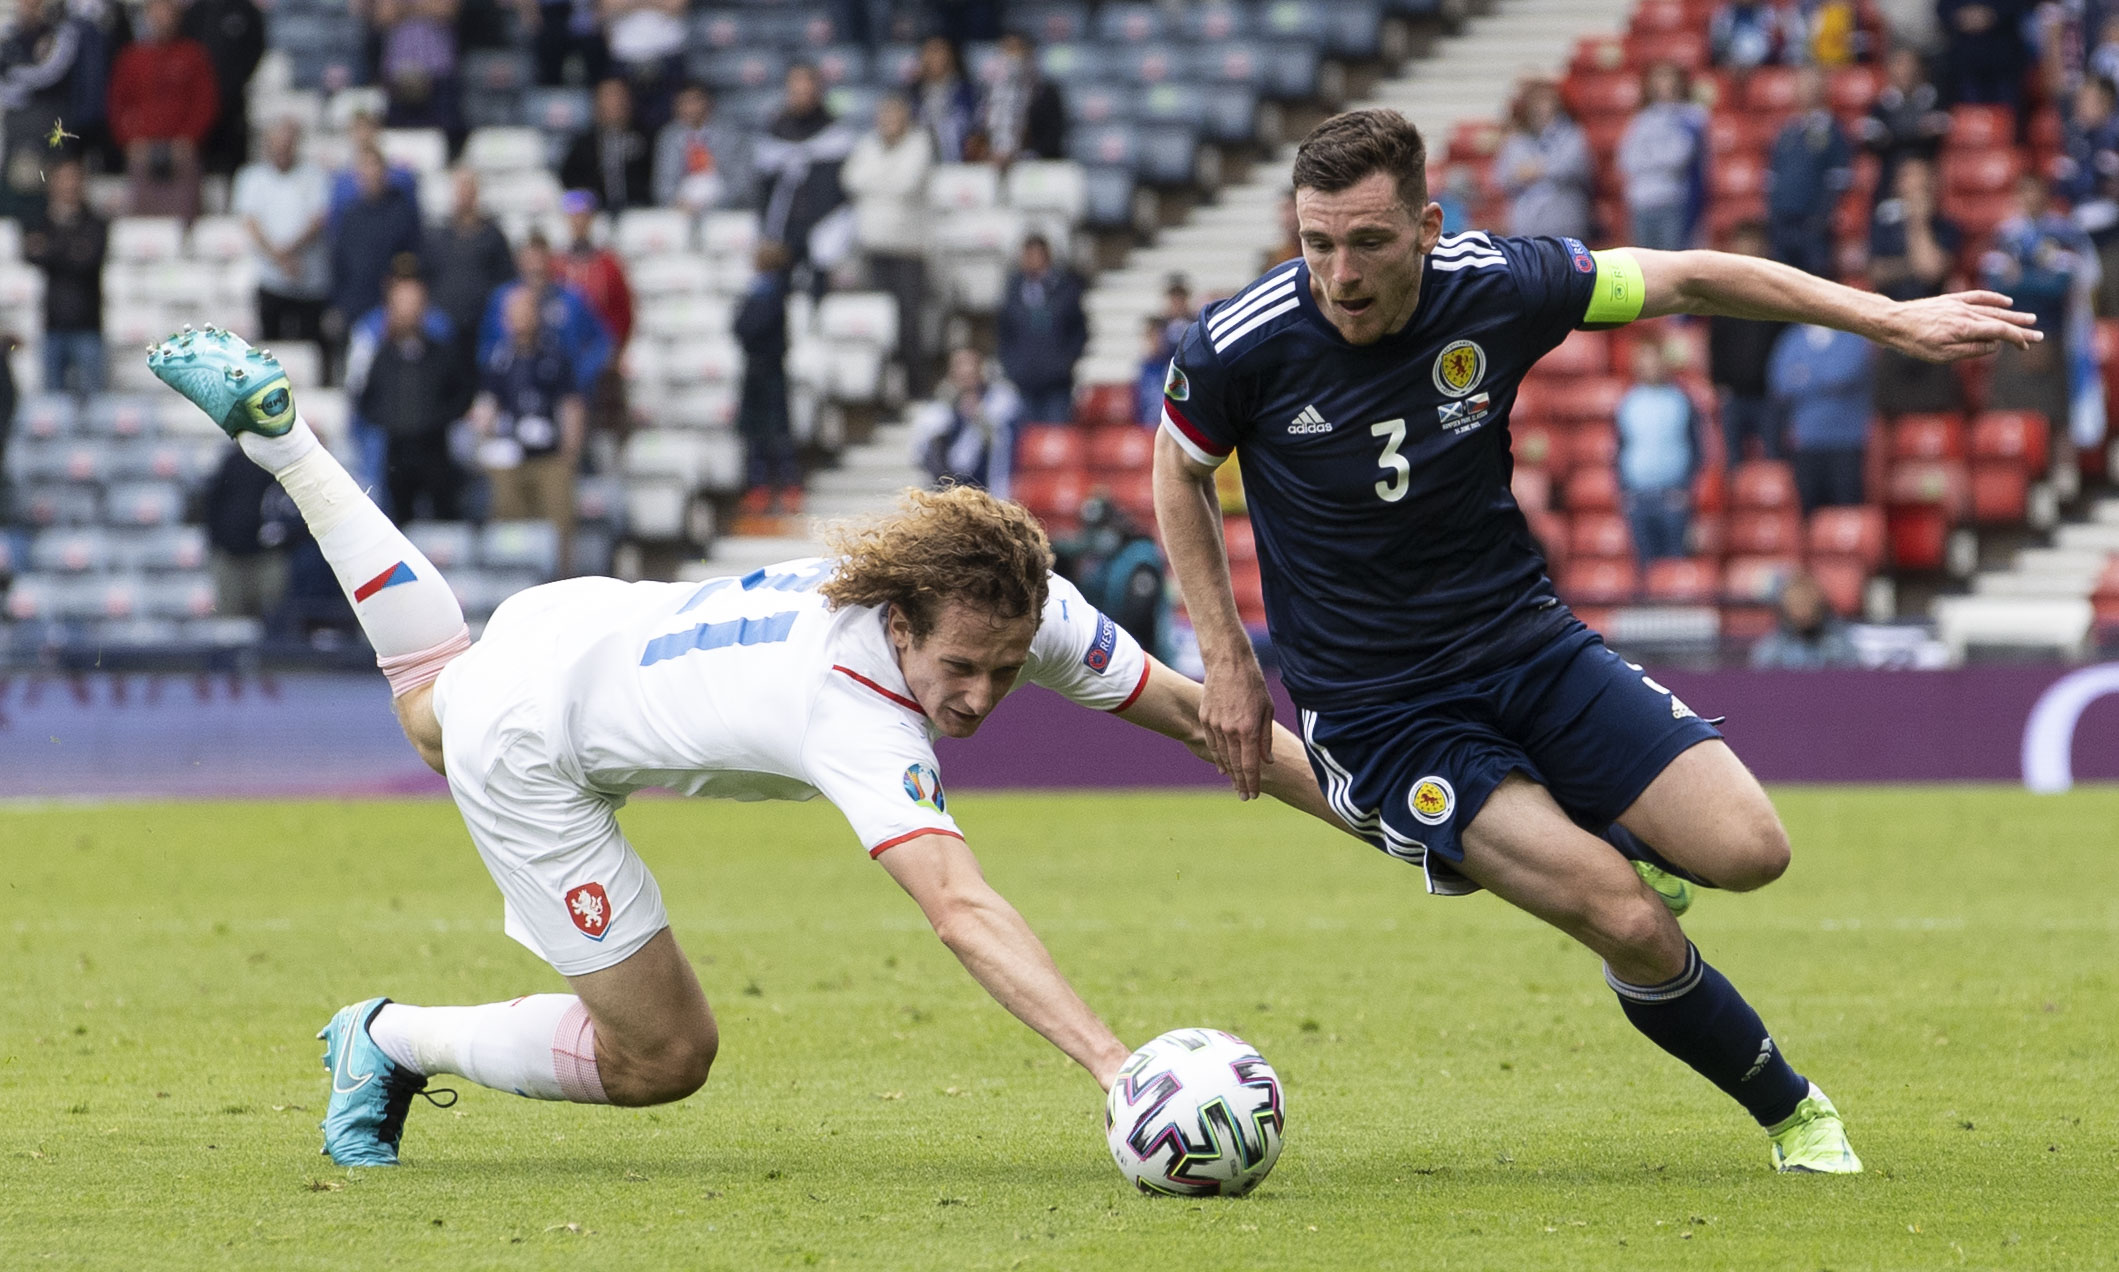 Andy Robertson's performance was a positive for Scotland.